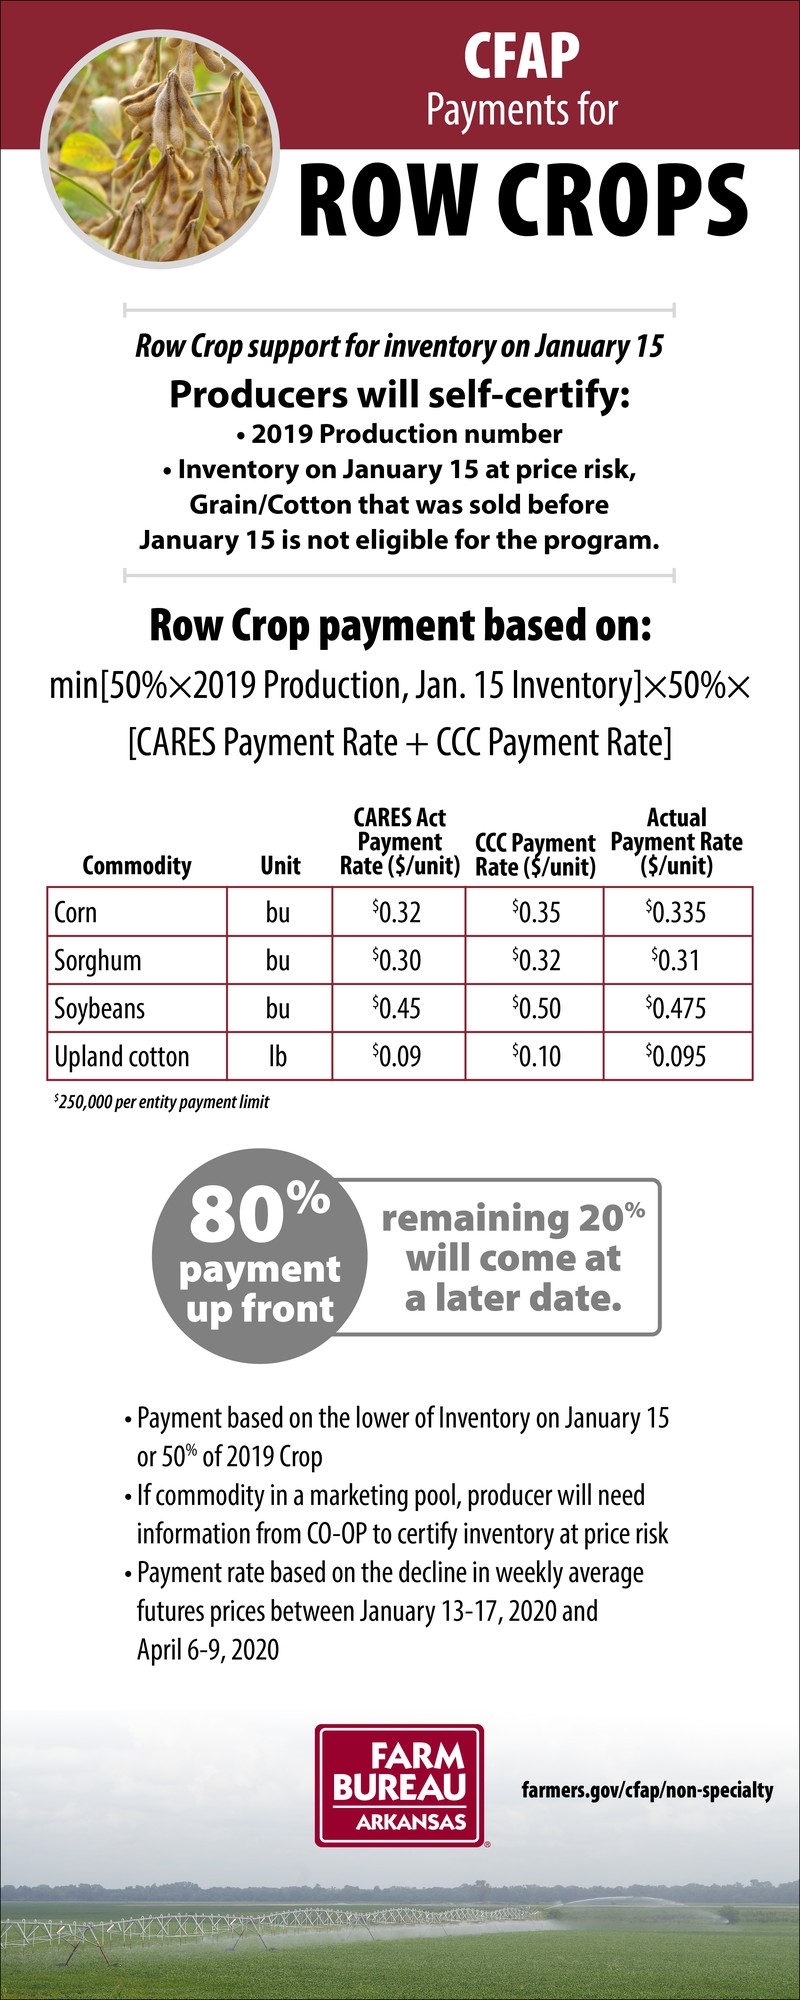 CFAP payments for row crops image